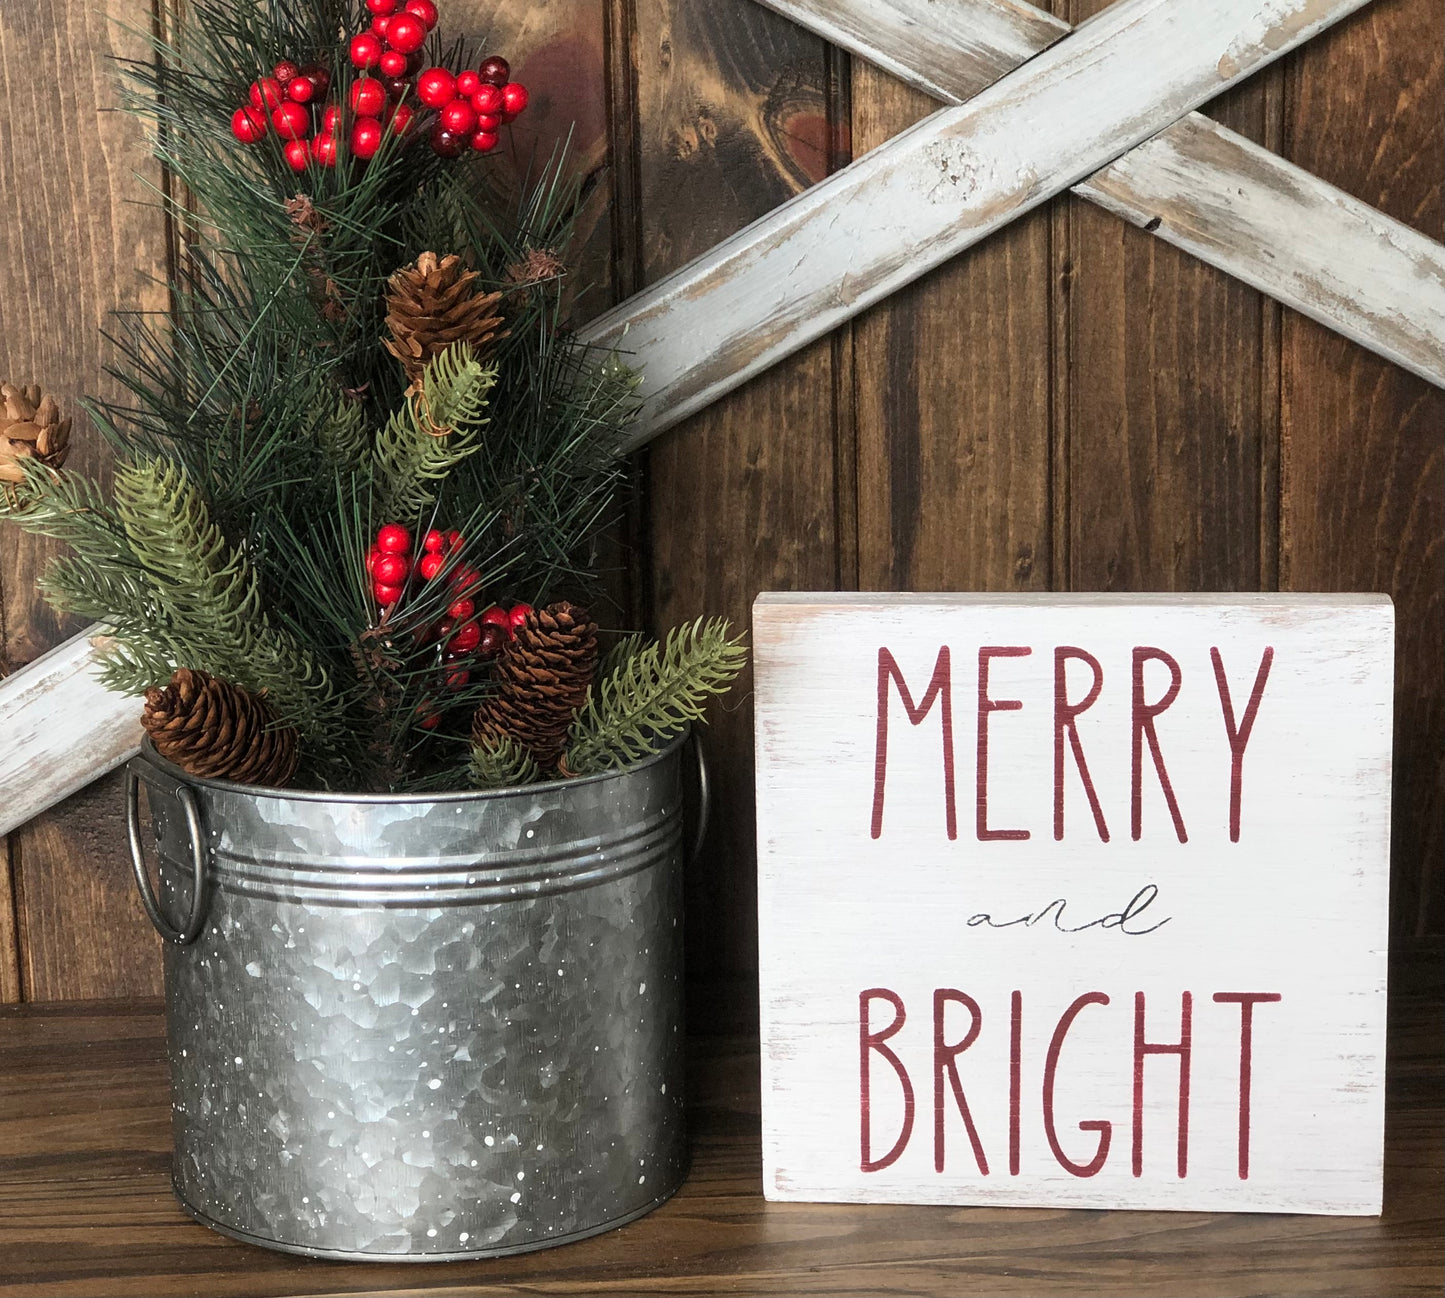 "Merry and bright" wood sign